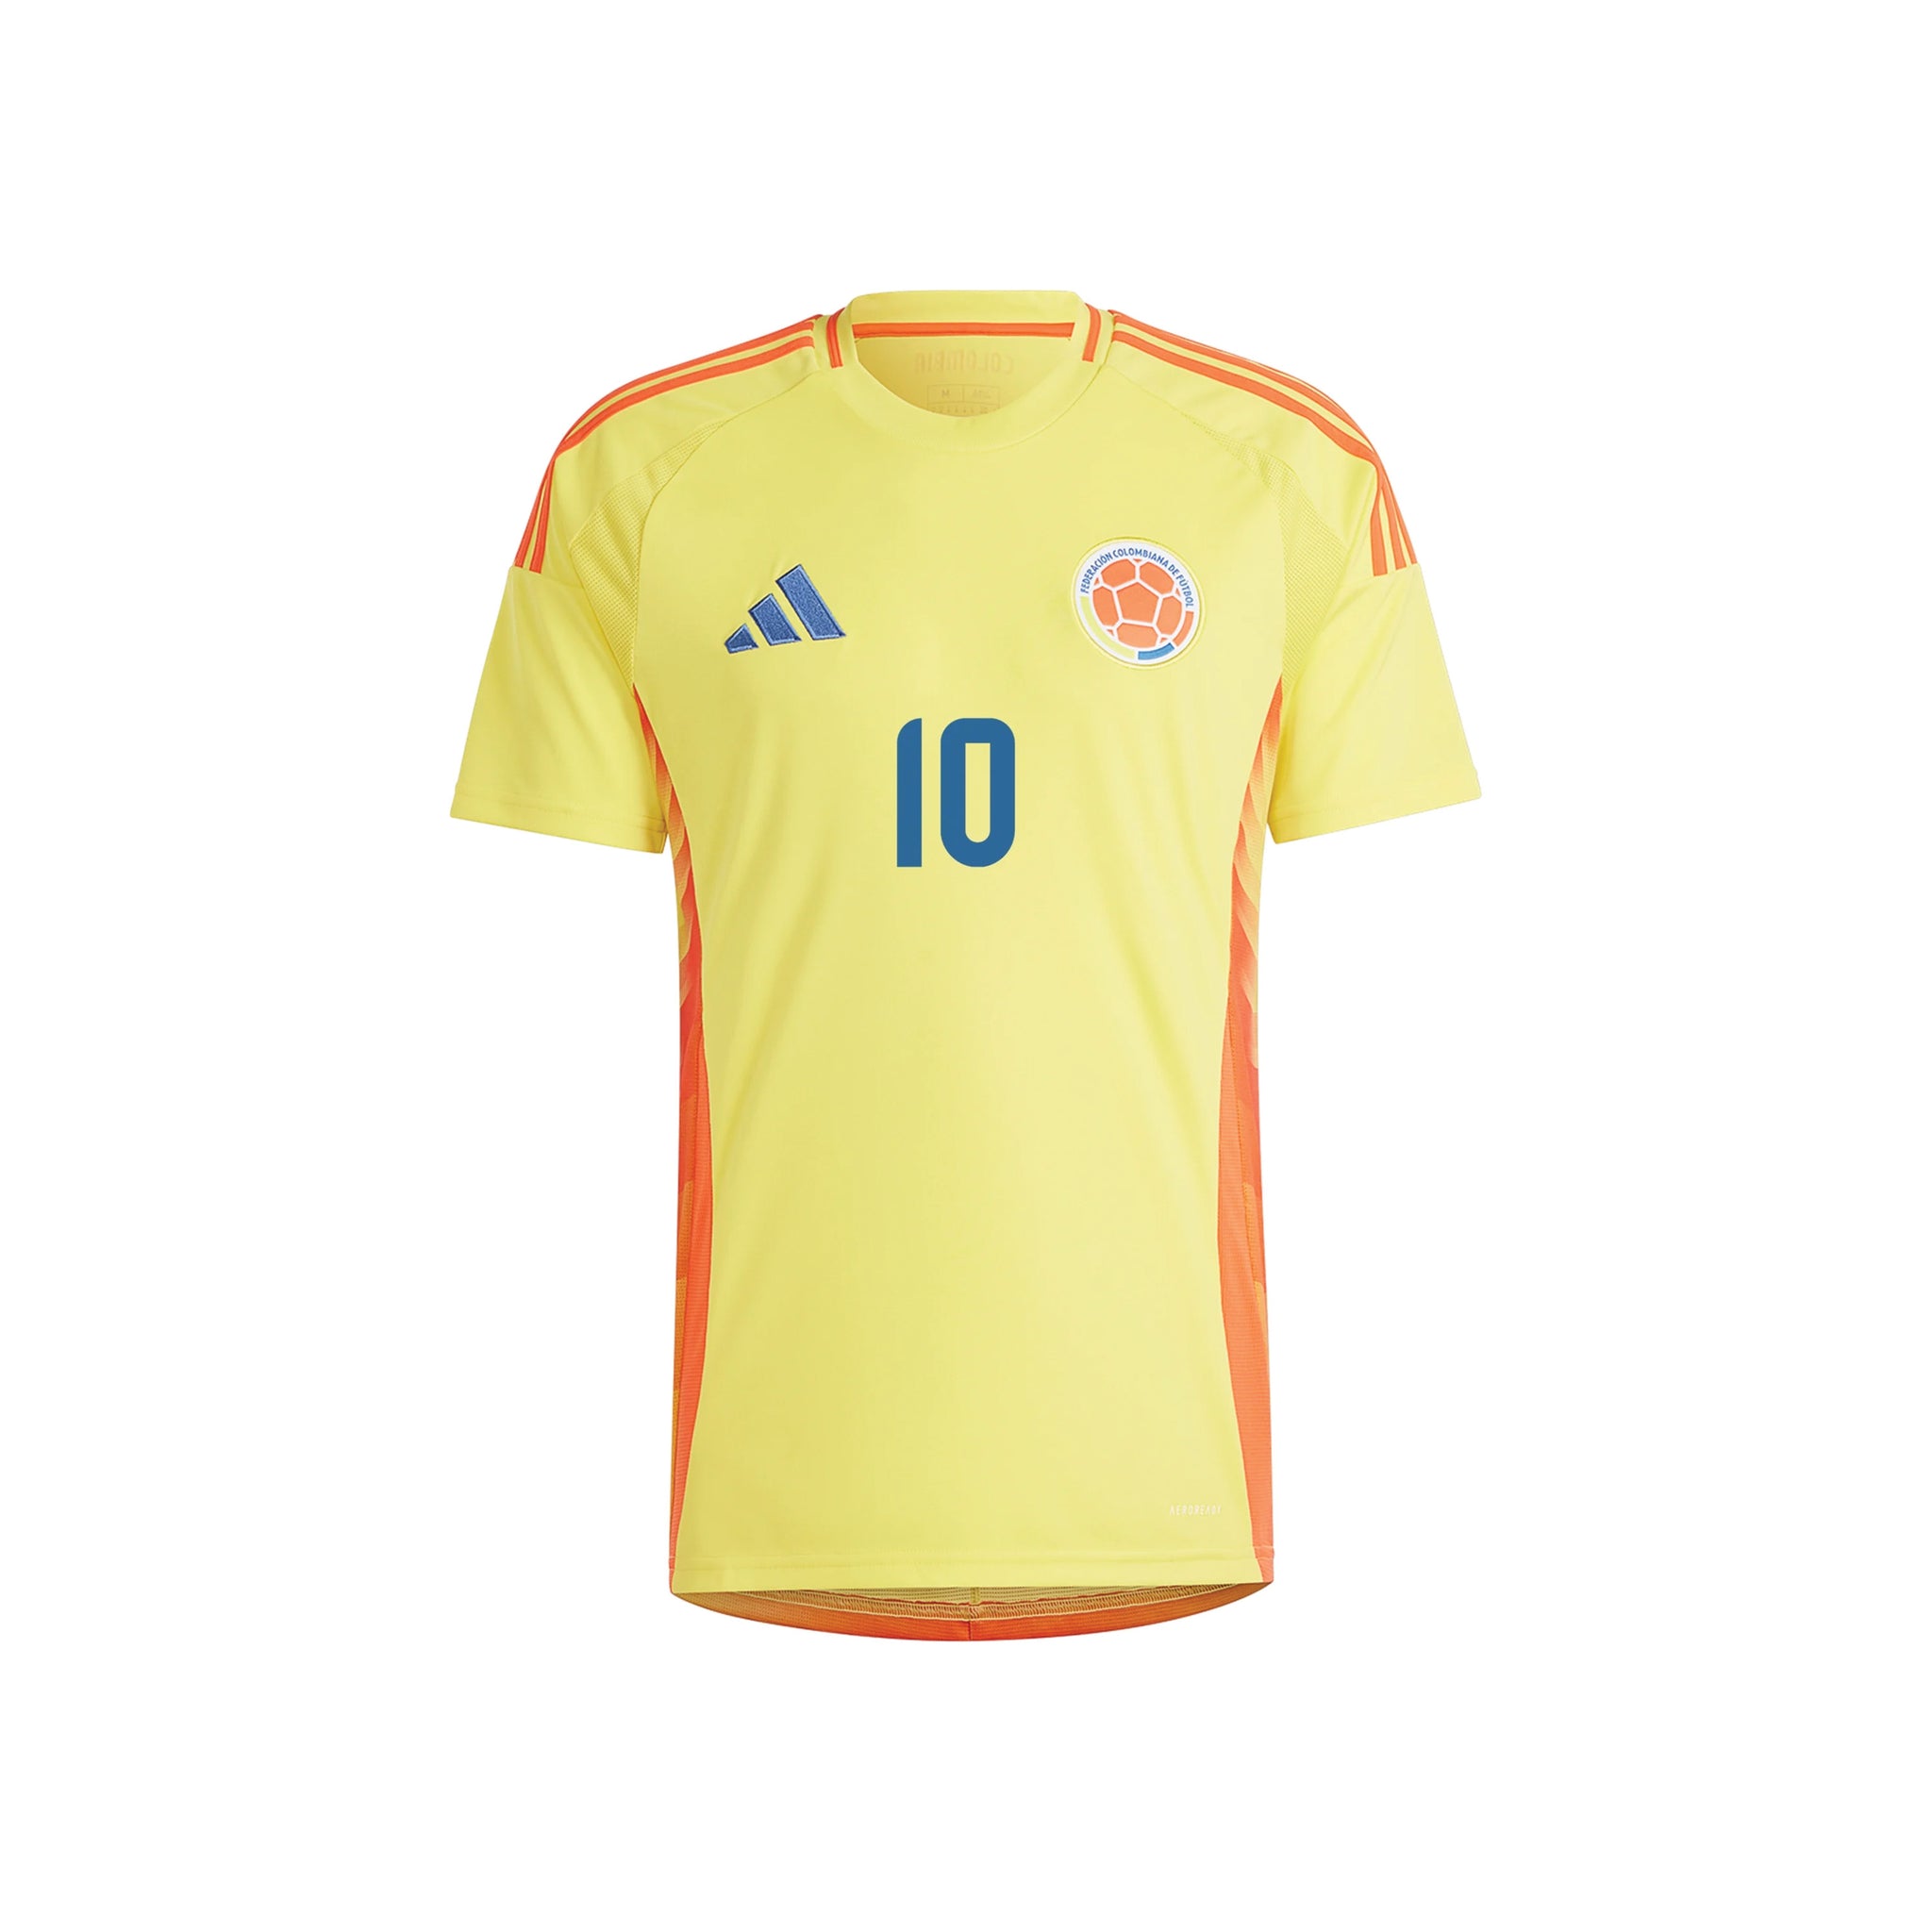 ADIDAS Colombia Home JAMES 2024